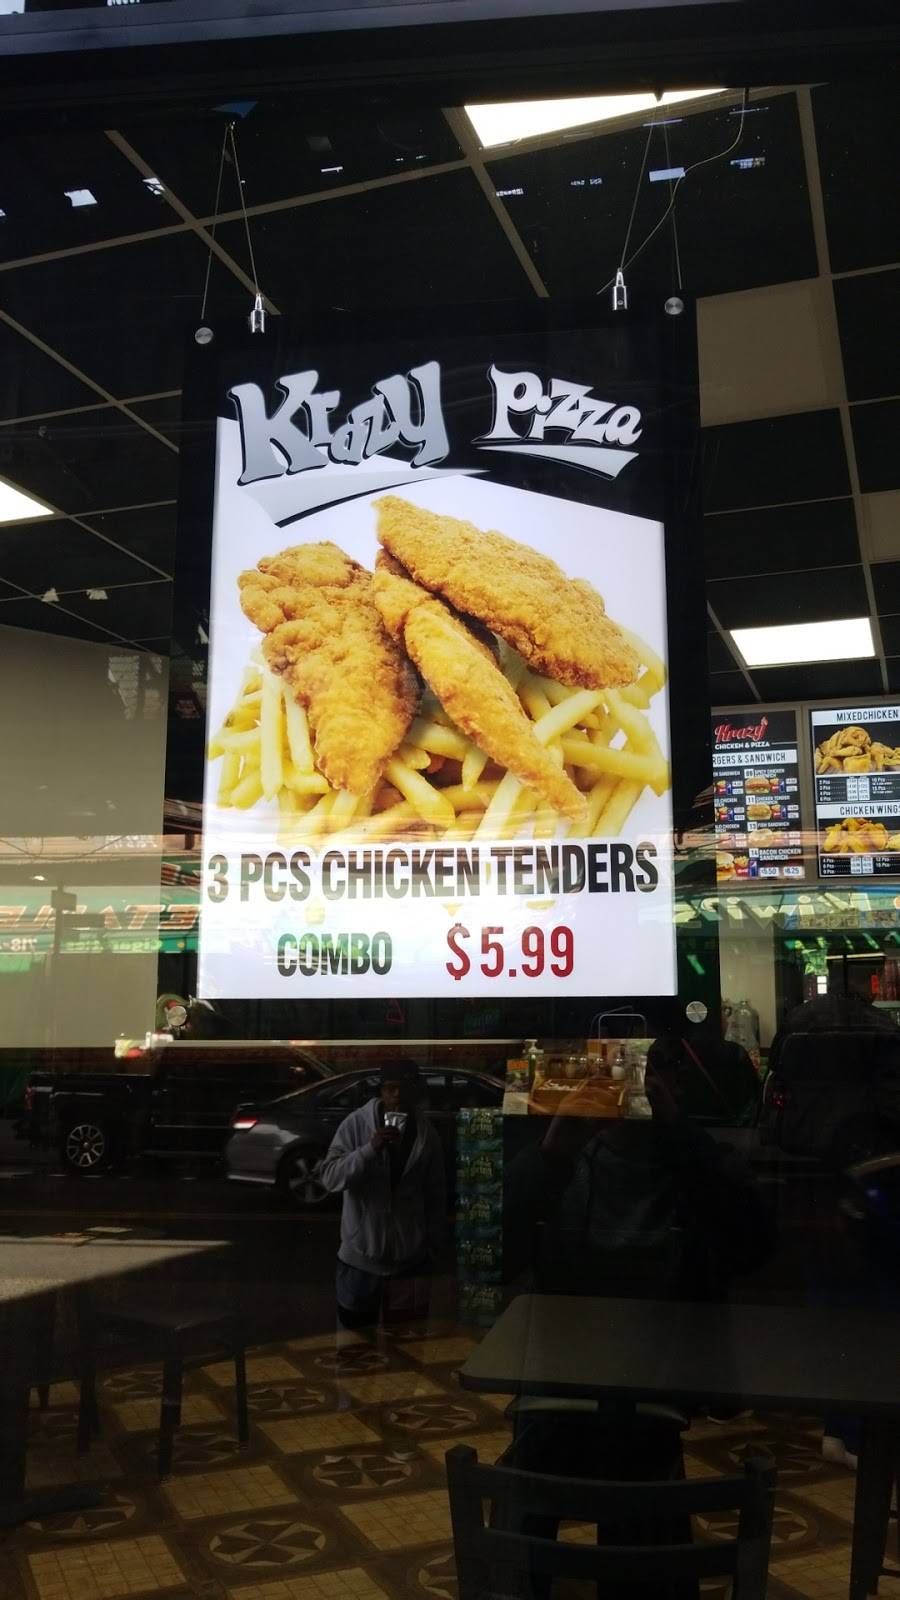 Krazy Pizza and Wings | restaurant | 956 Broadway, Brooklyn, NY 11221, USA | 7189754496 OR +1 718-975-4496